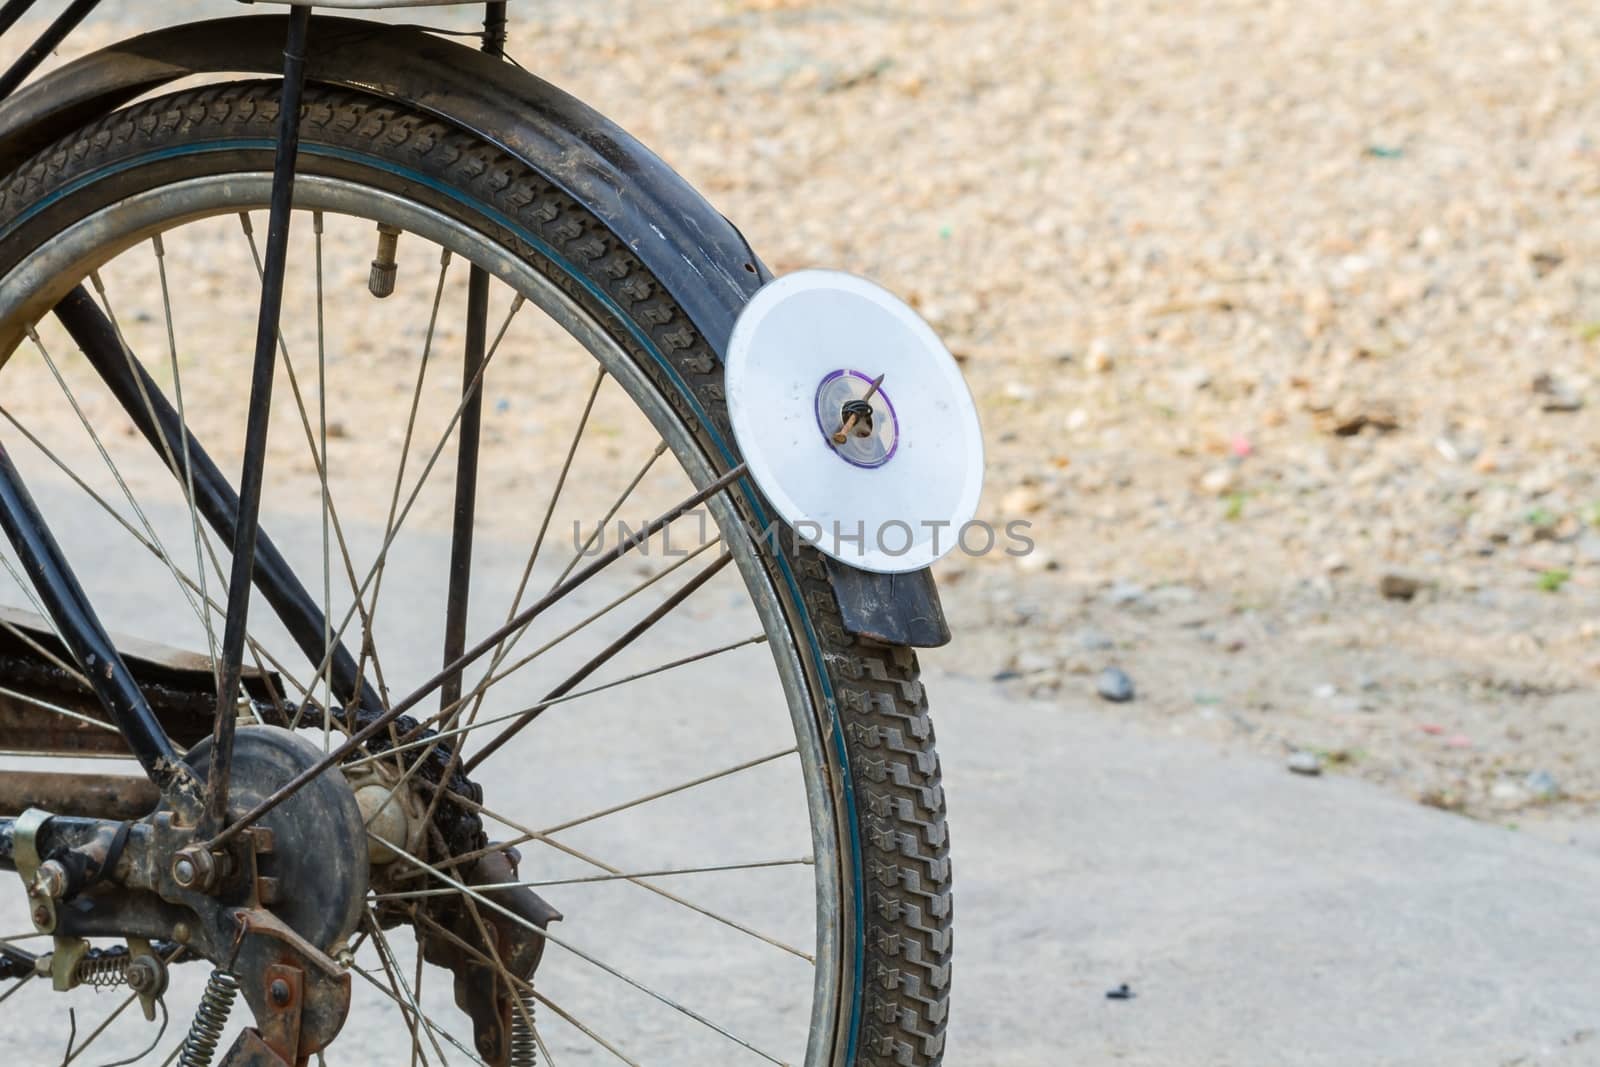 cd disc on rear mudguard of bicycle, used as reflector by a3701027